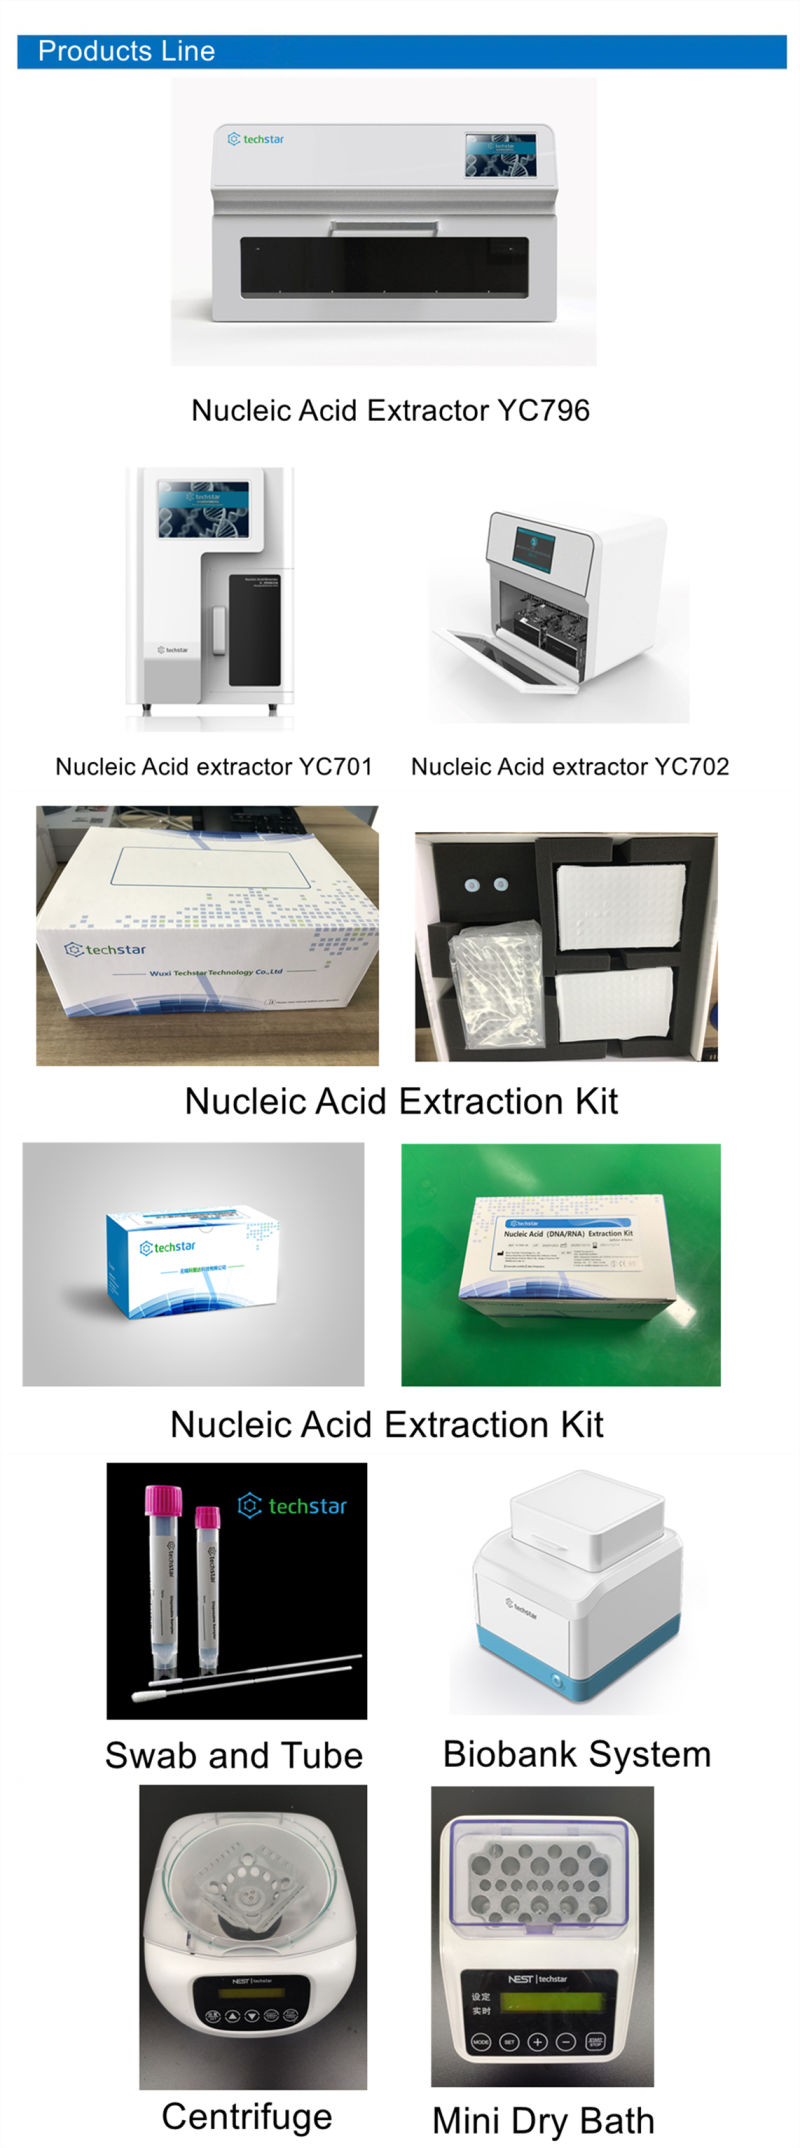 Nucleic Acid Extraction Kit Magnatic Beat Method